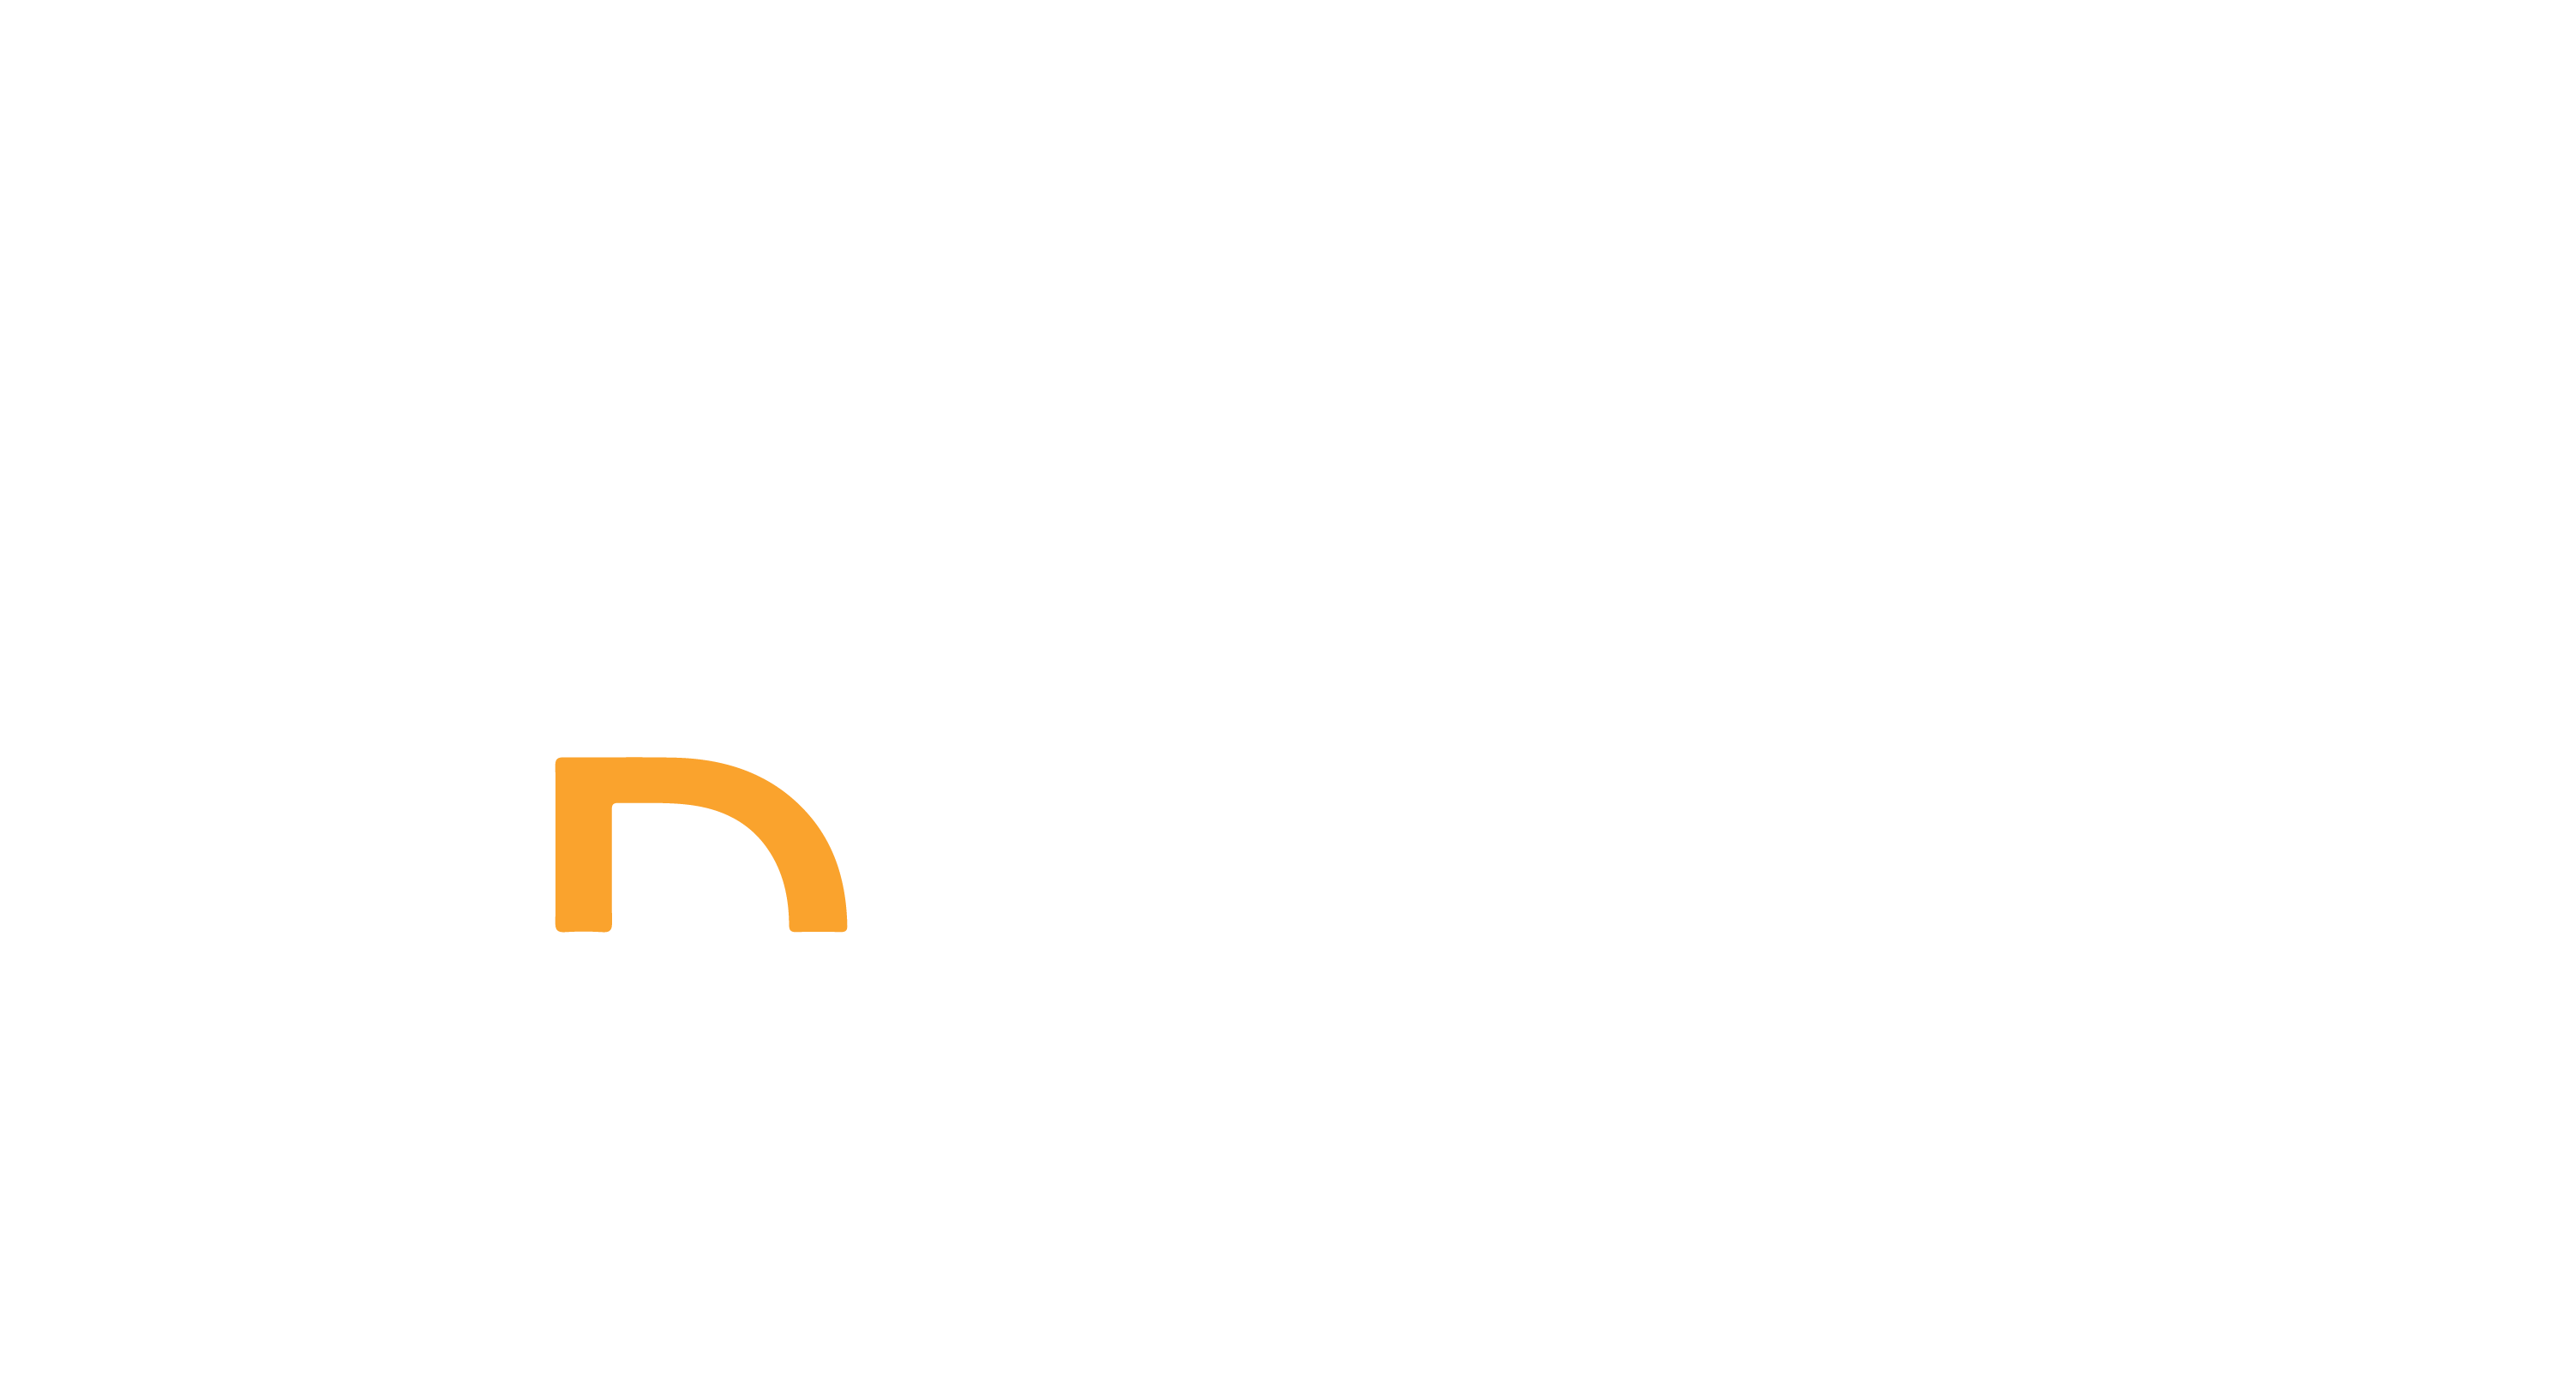 MD at Sea Power by Healthcarelive